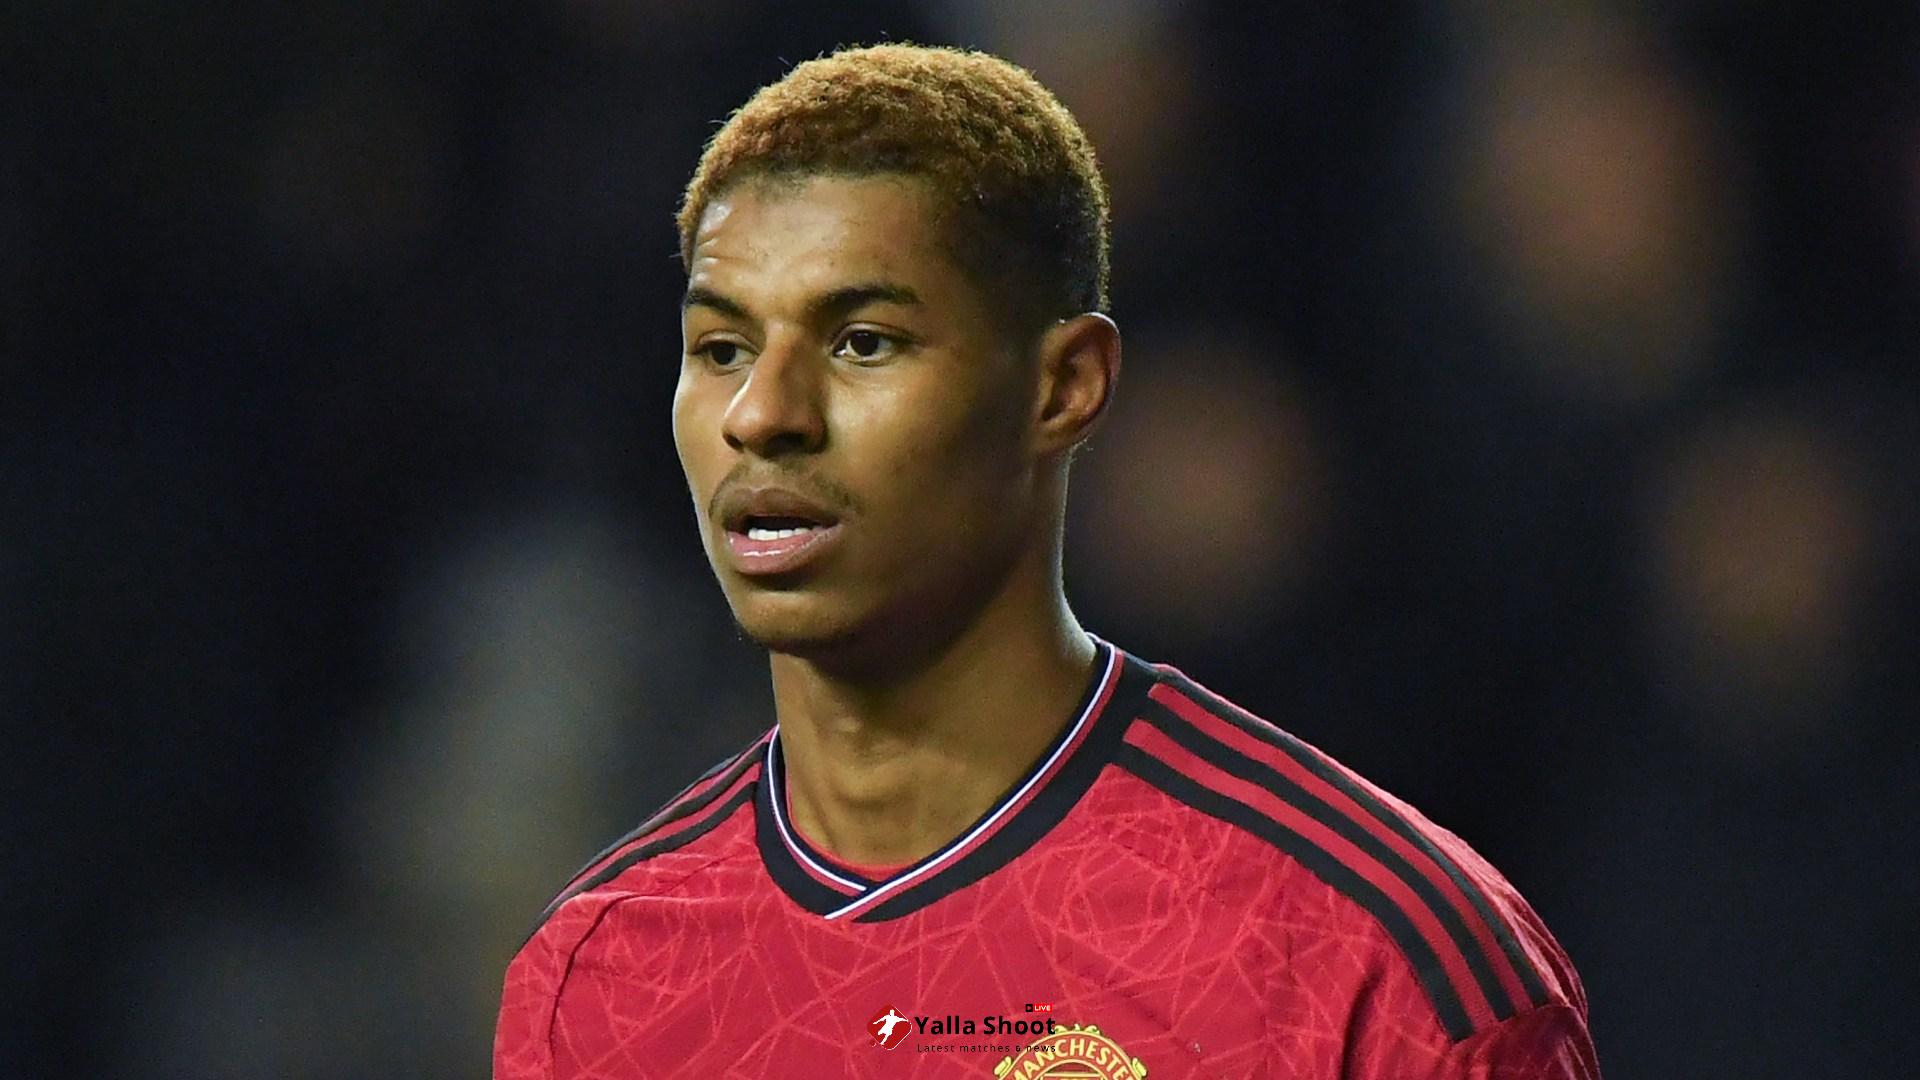 Man Utd says Marcus Rashford 'has taken responsibility' after partying & missing training claiming he was ill